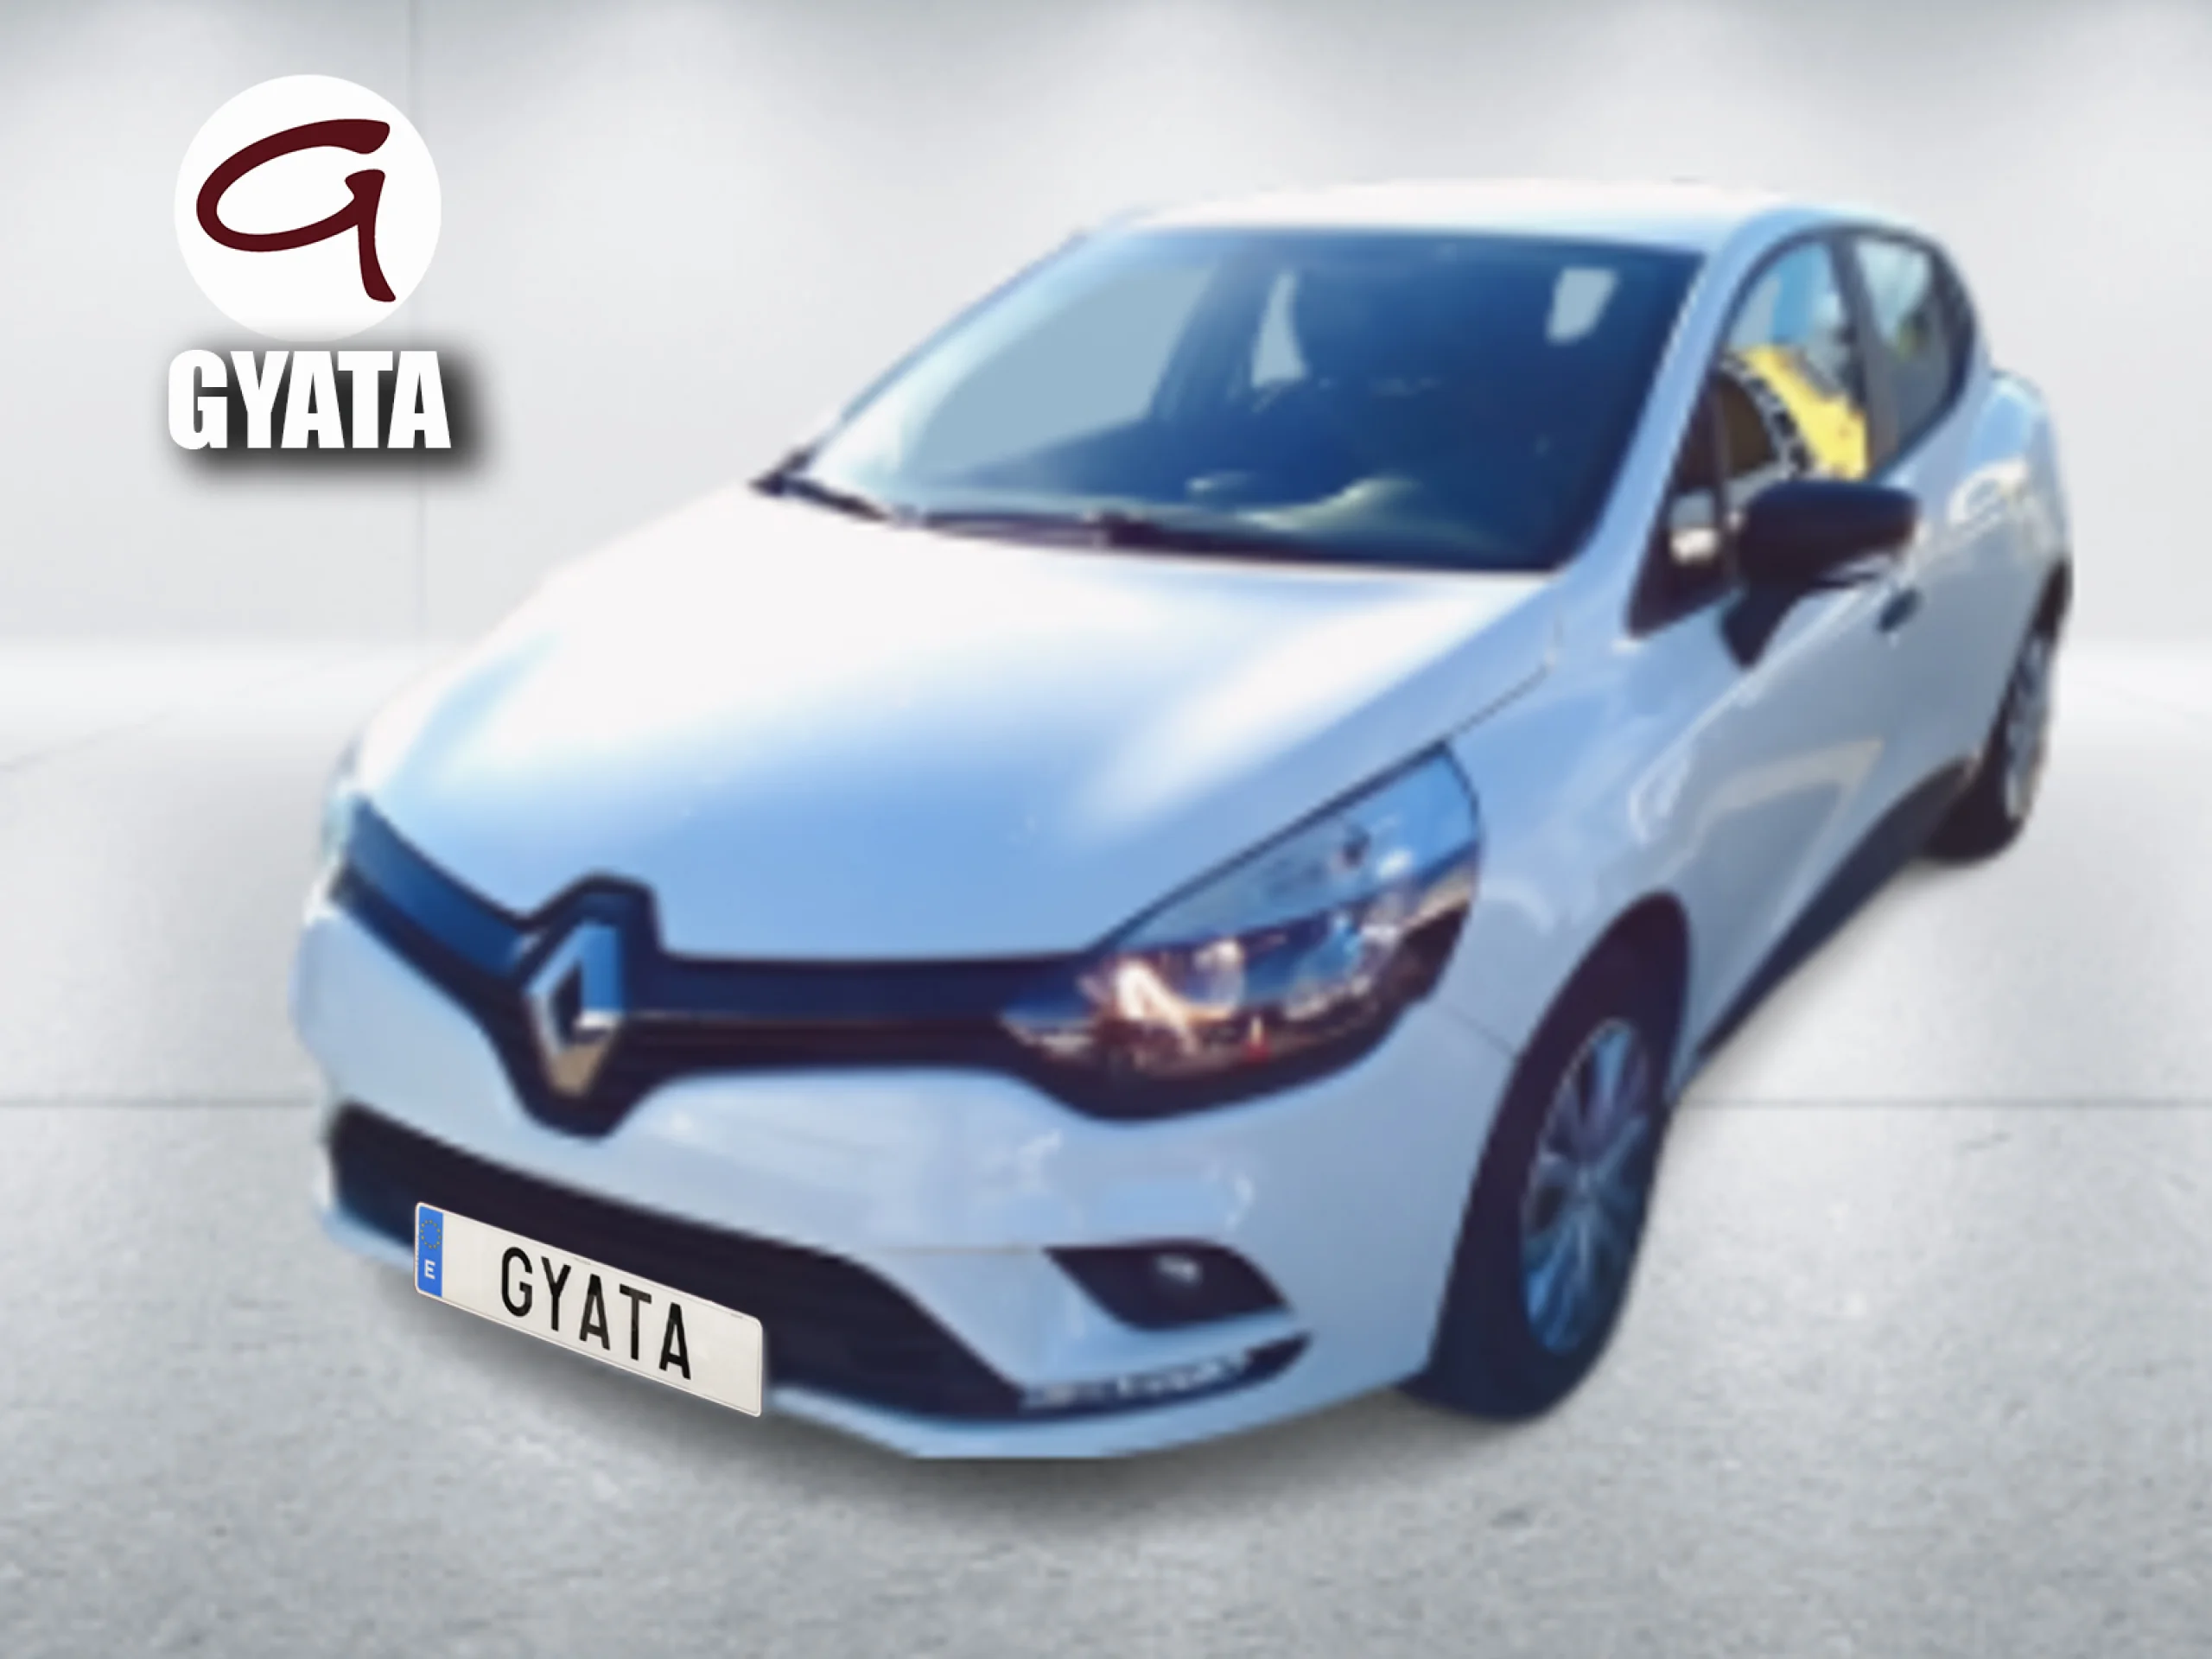 Renault Clio Business TCe 66 kW (90 CV) GLP - Foto 1